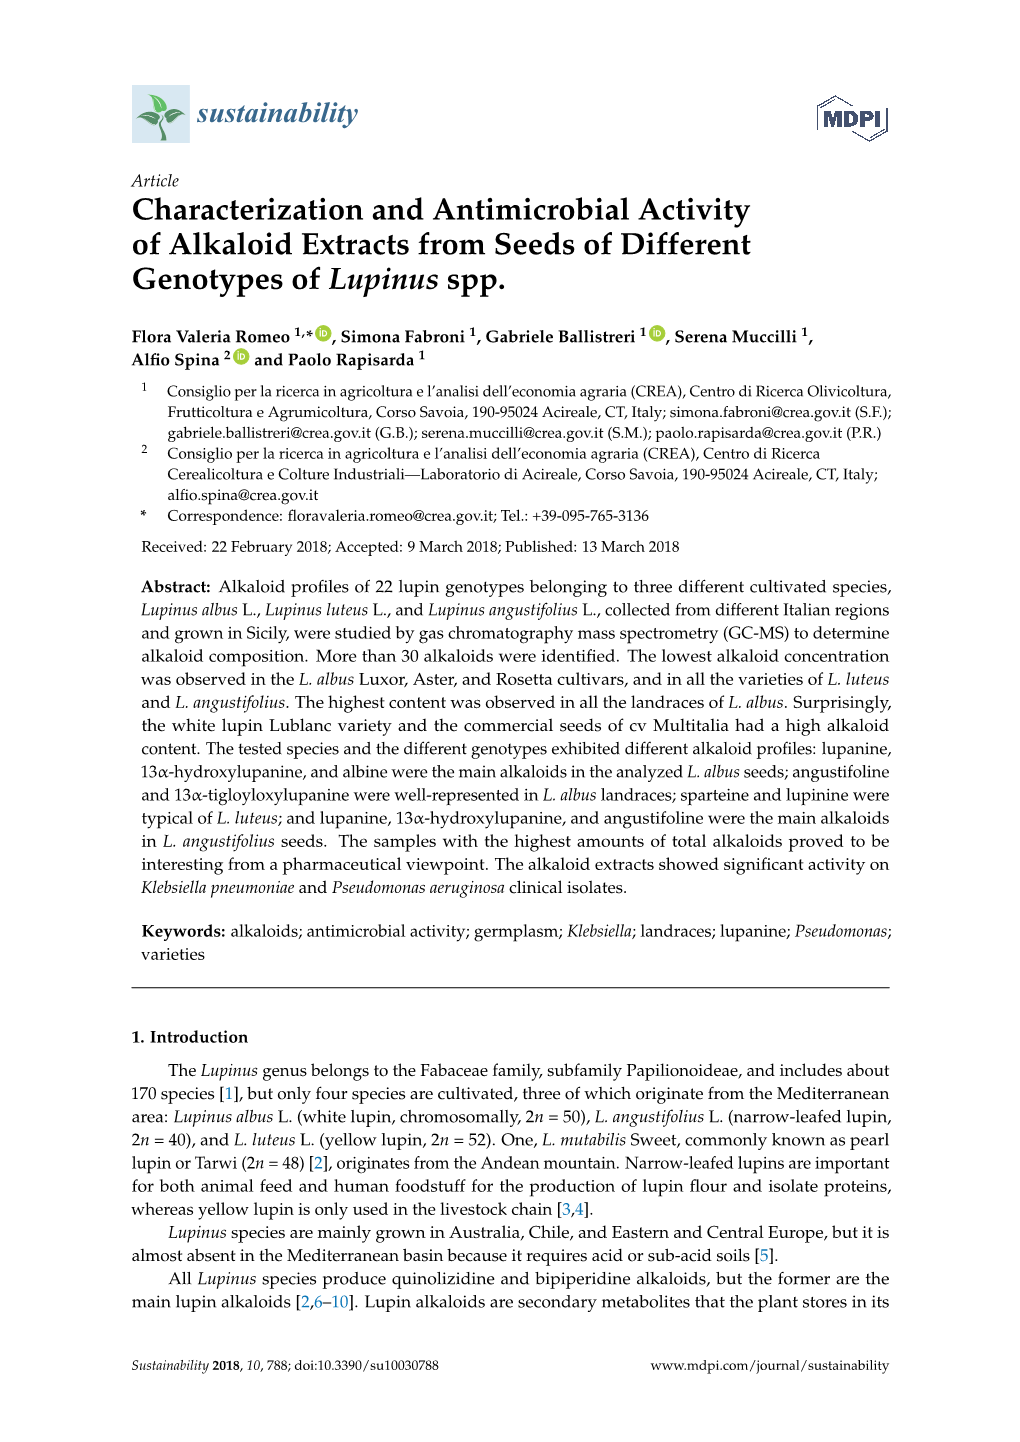 Characterization and Antimicrobial Activity of Alkaloid Extracts from Seeds of Different Genotypes of Lupinus Spp